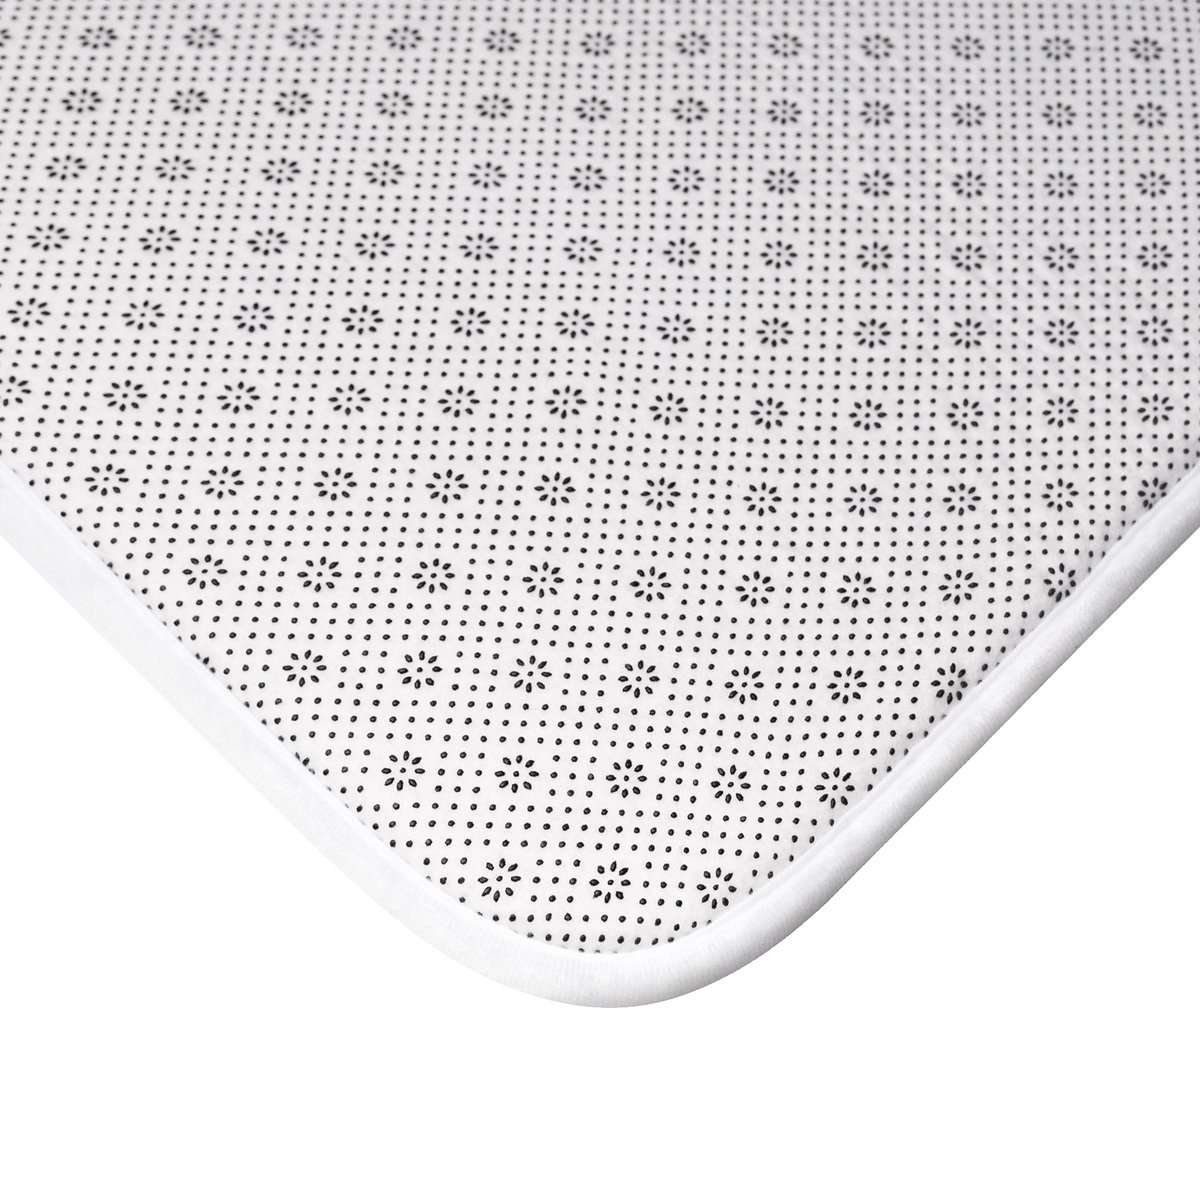 shop-the-official-online-store-of-arcturian-metamorphosis-grid-bath-mat-hot-on-sale_5.jpg